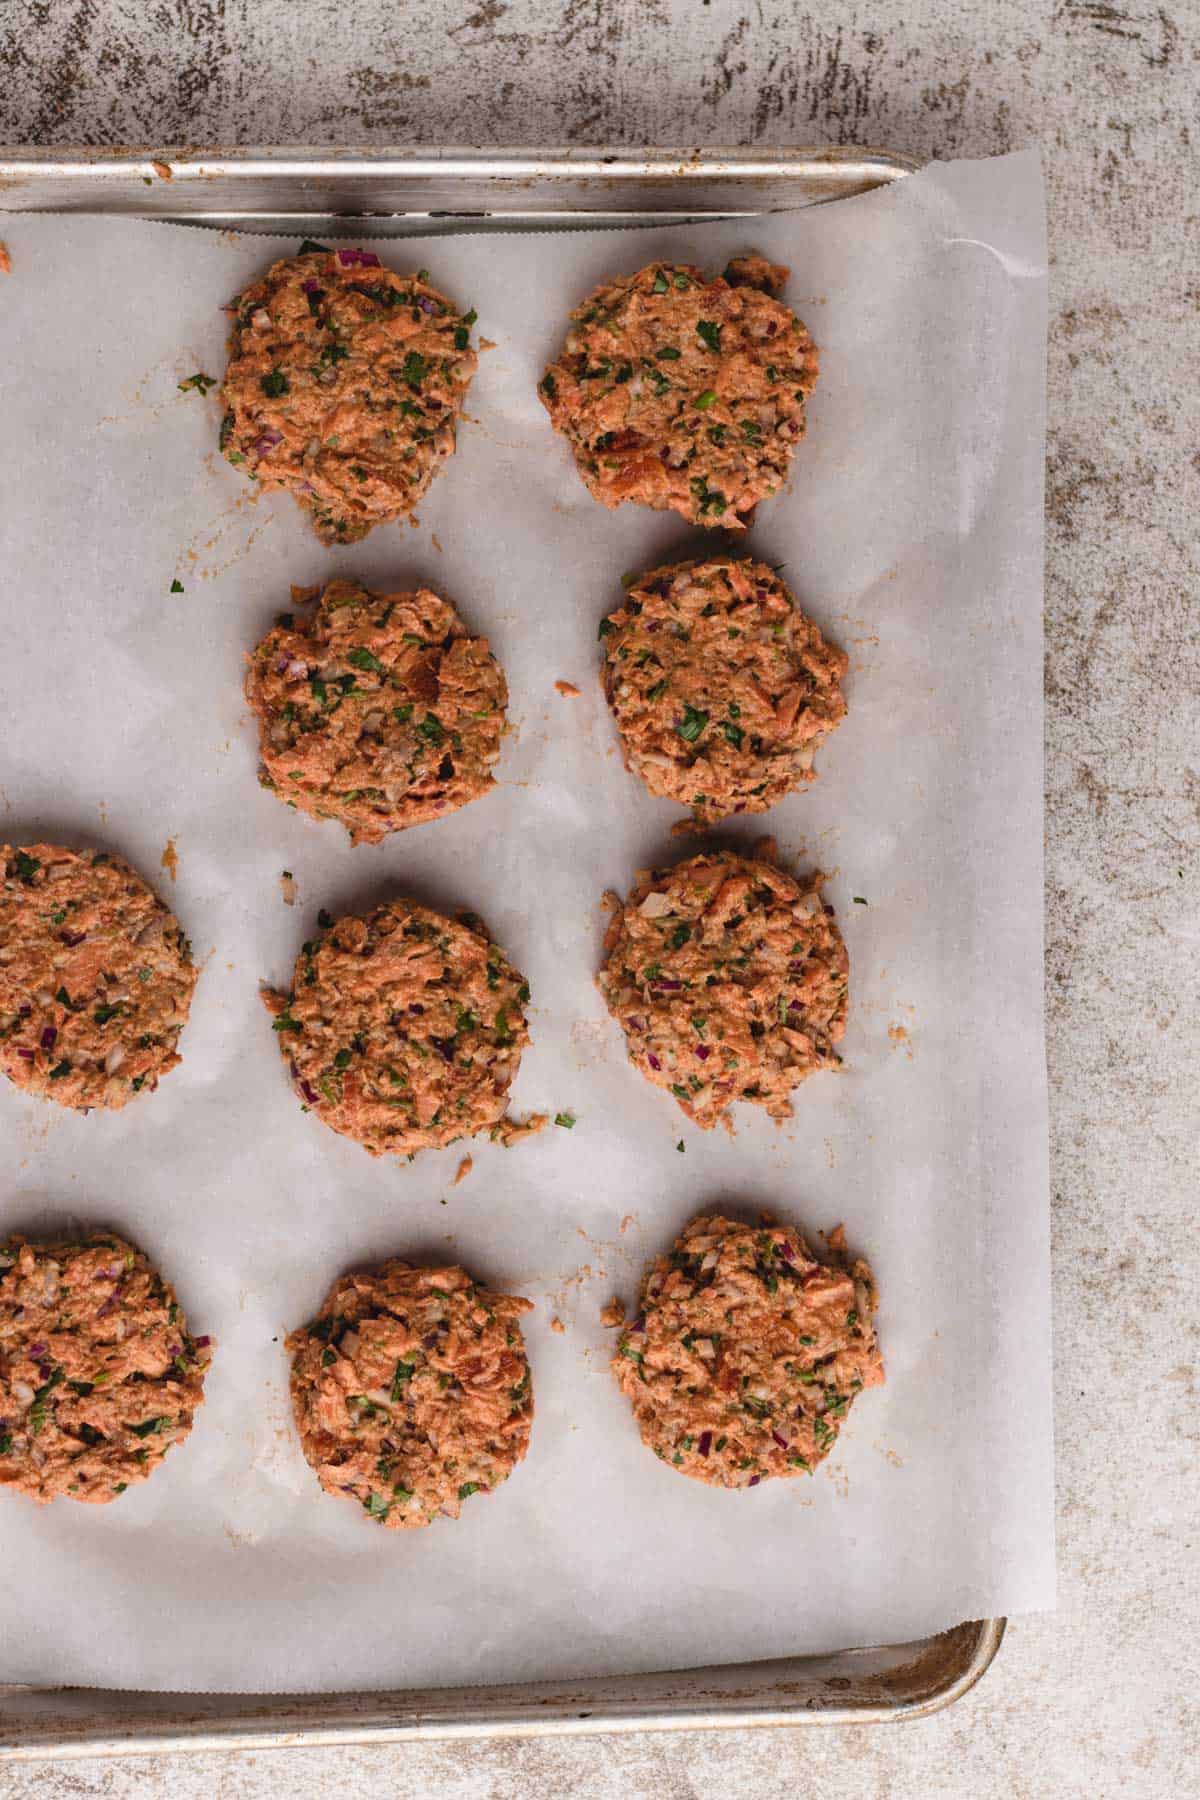 Formed salmon cakes on baking tray.